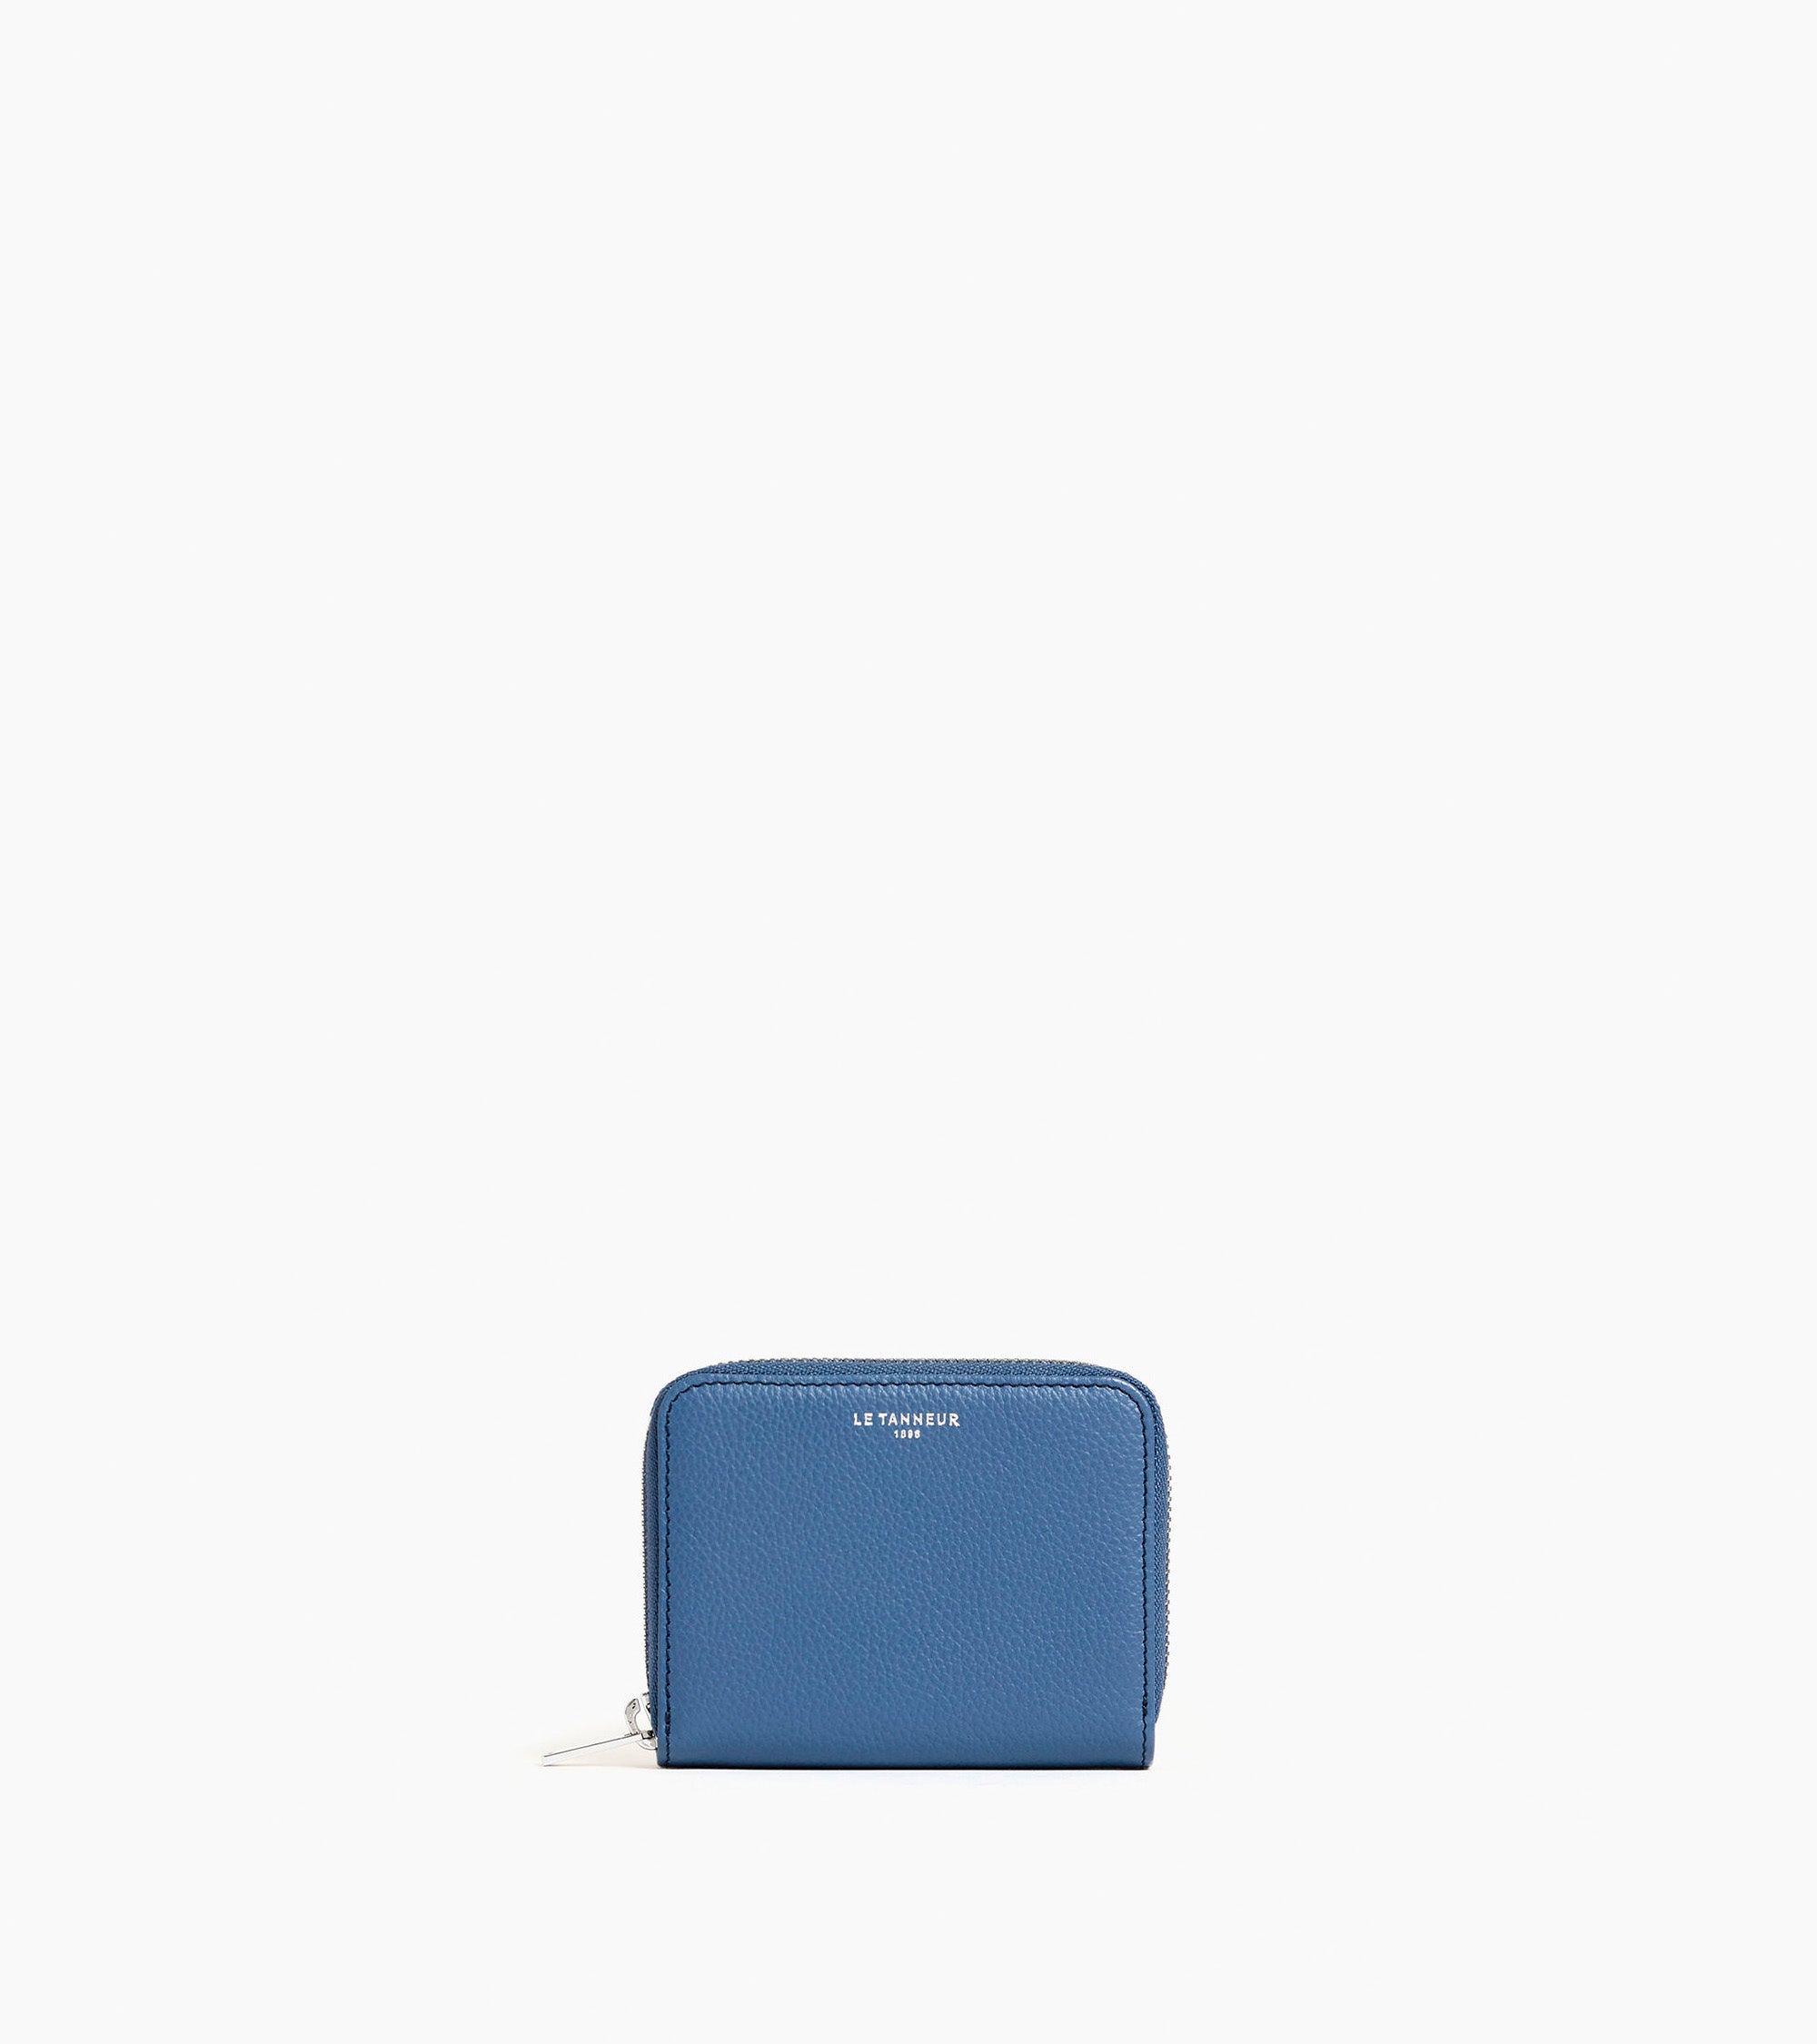 Emilie coin case in pebbled leather